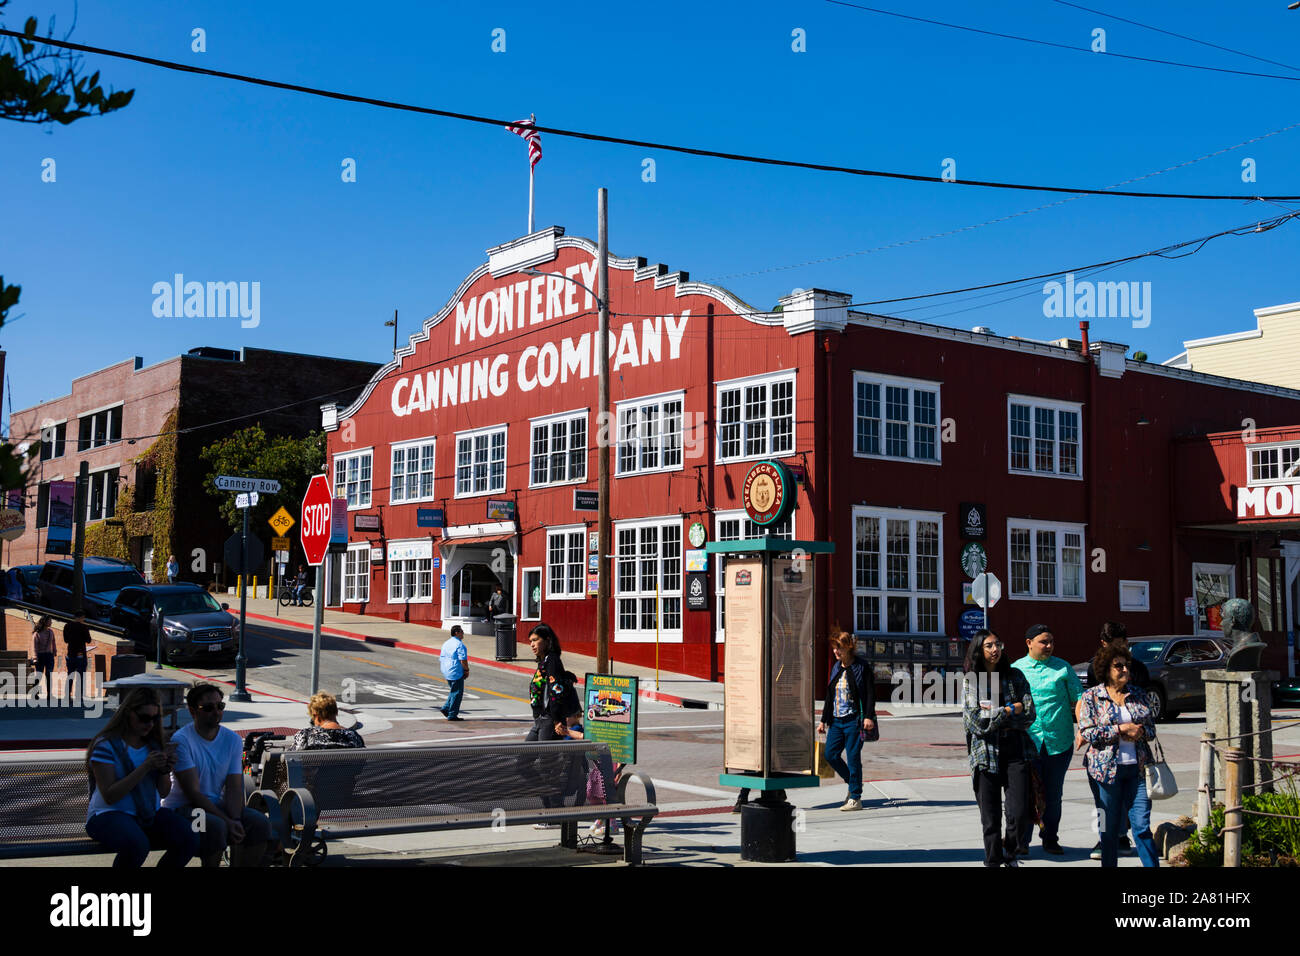 Monterey Canning Company building, Cannery Row, Monterey, California, United States of America. Stock Photo